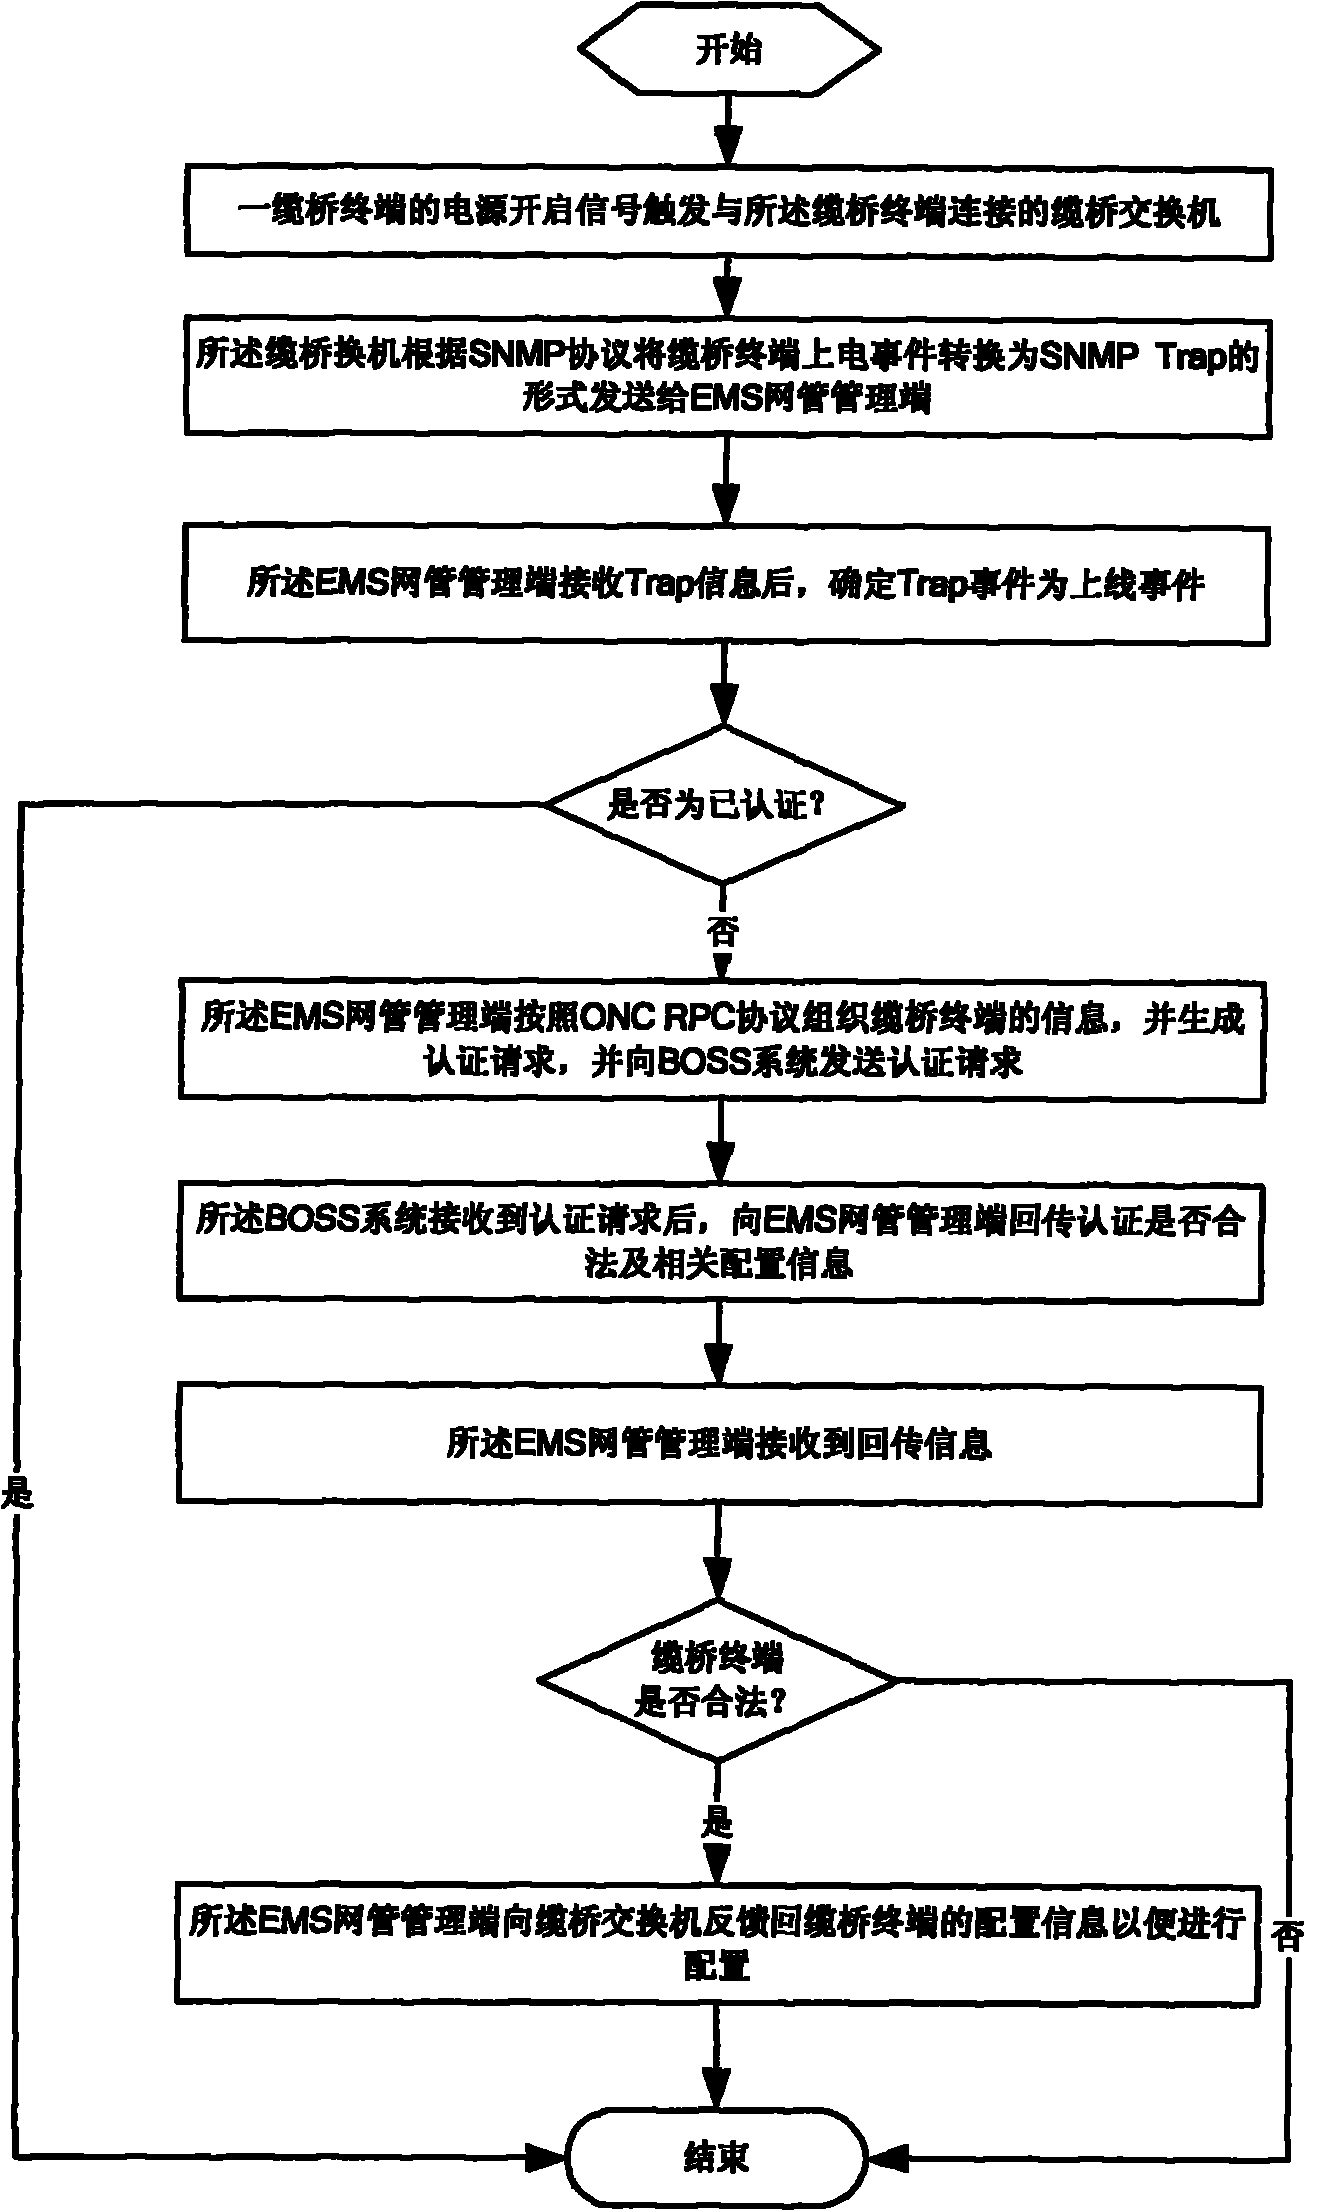 Method for automatic authentication and configuration issue of cable bridge terminal with utilization of BOSS system